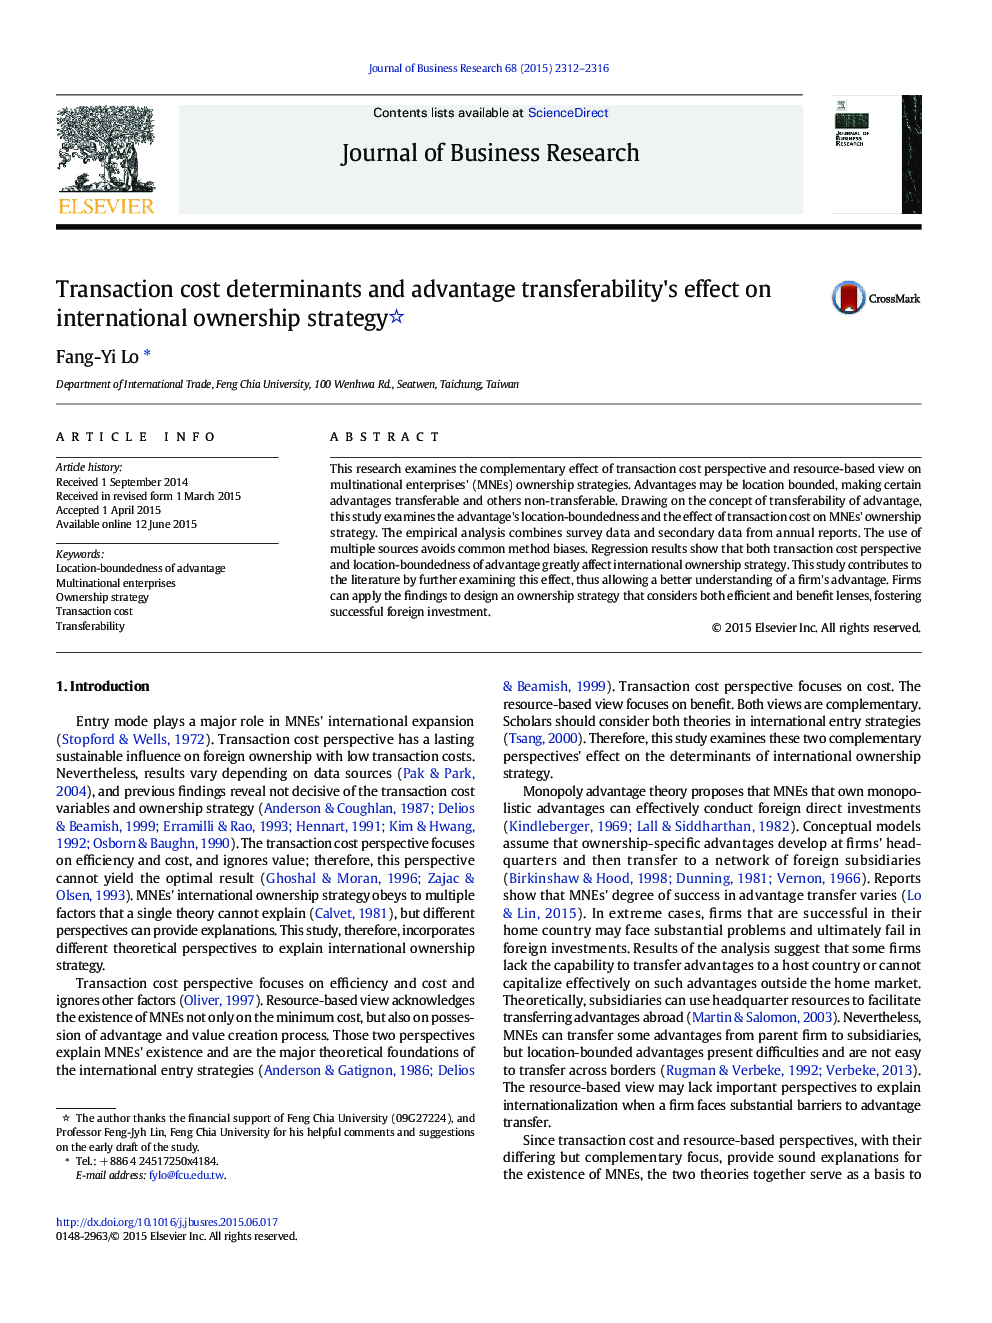 Transaction cost determinants and advantage transferability's effect on international ownership strategy